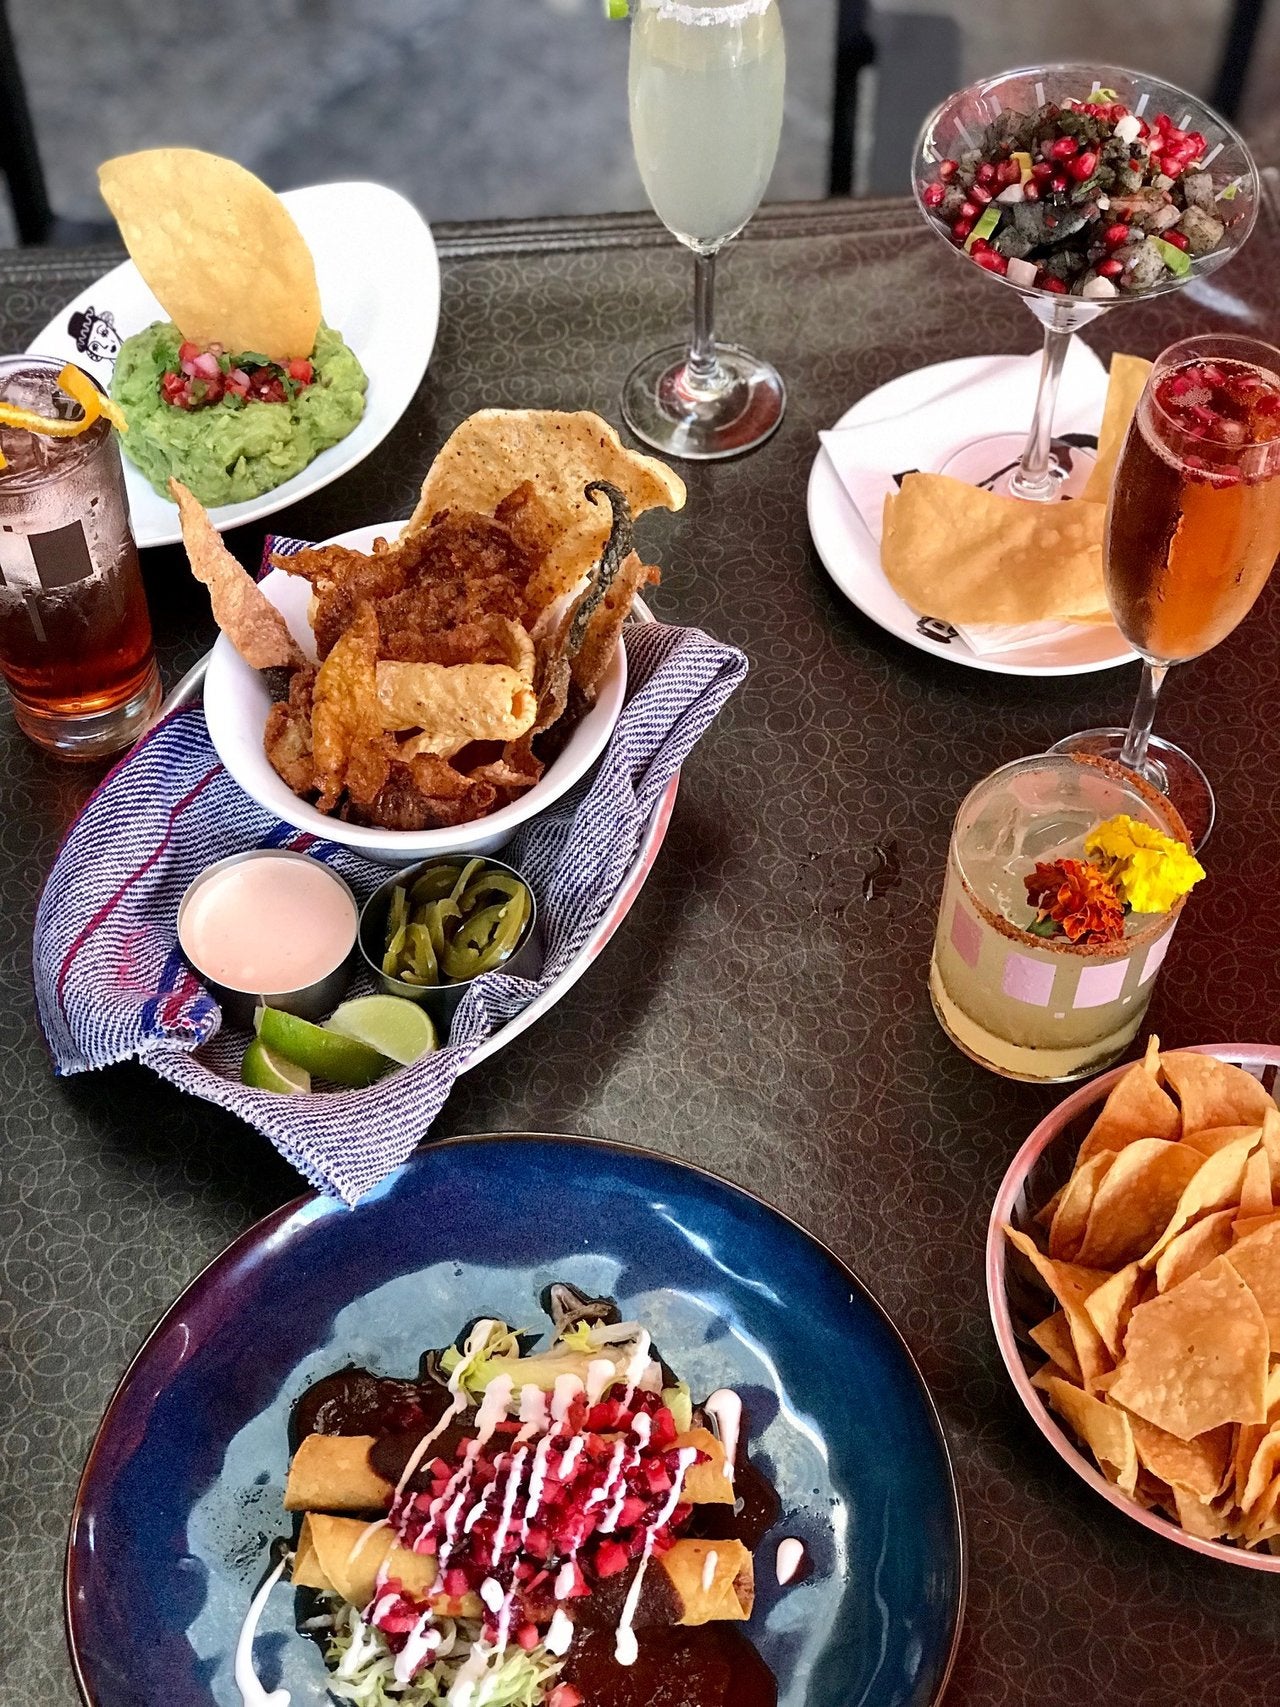 Day of the Dead spread at Border Grill DTLA